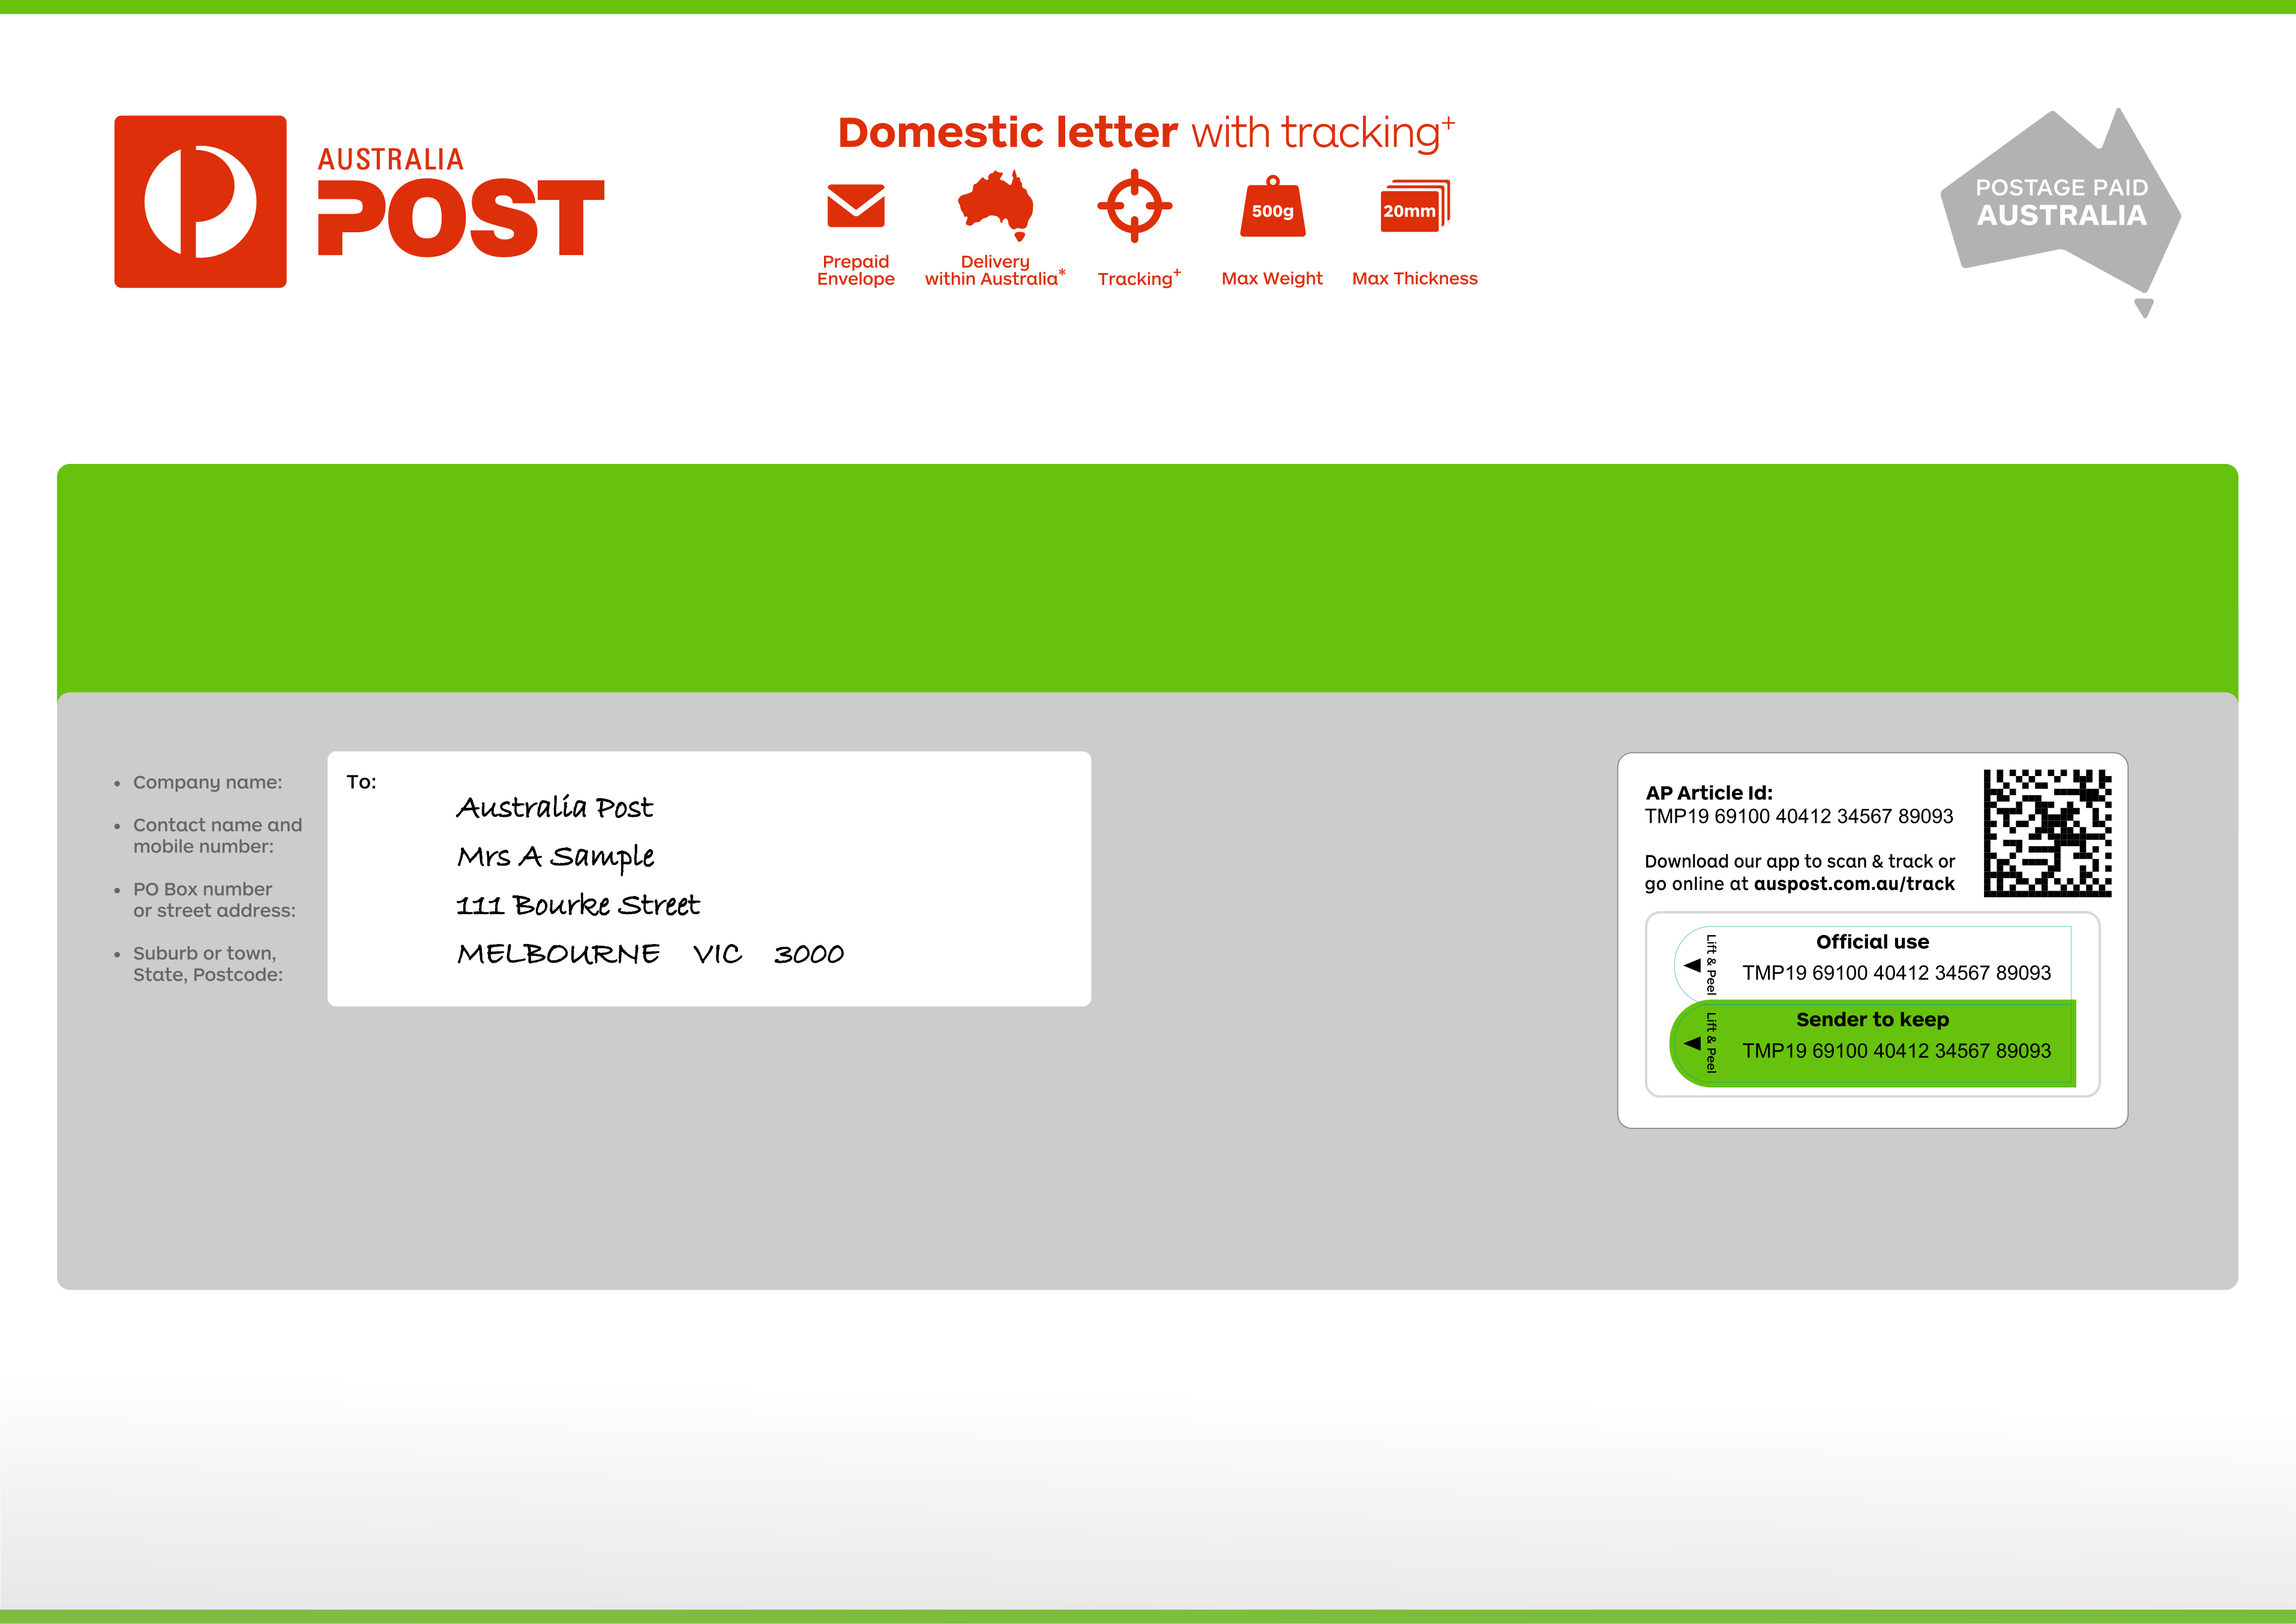 Australia Post Letter with Tracking